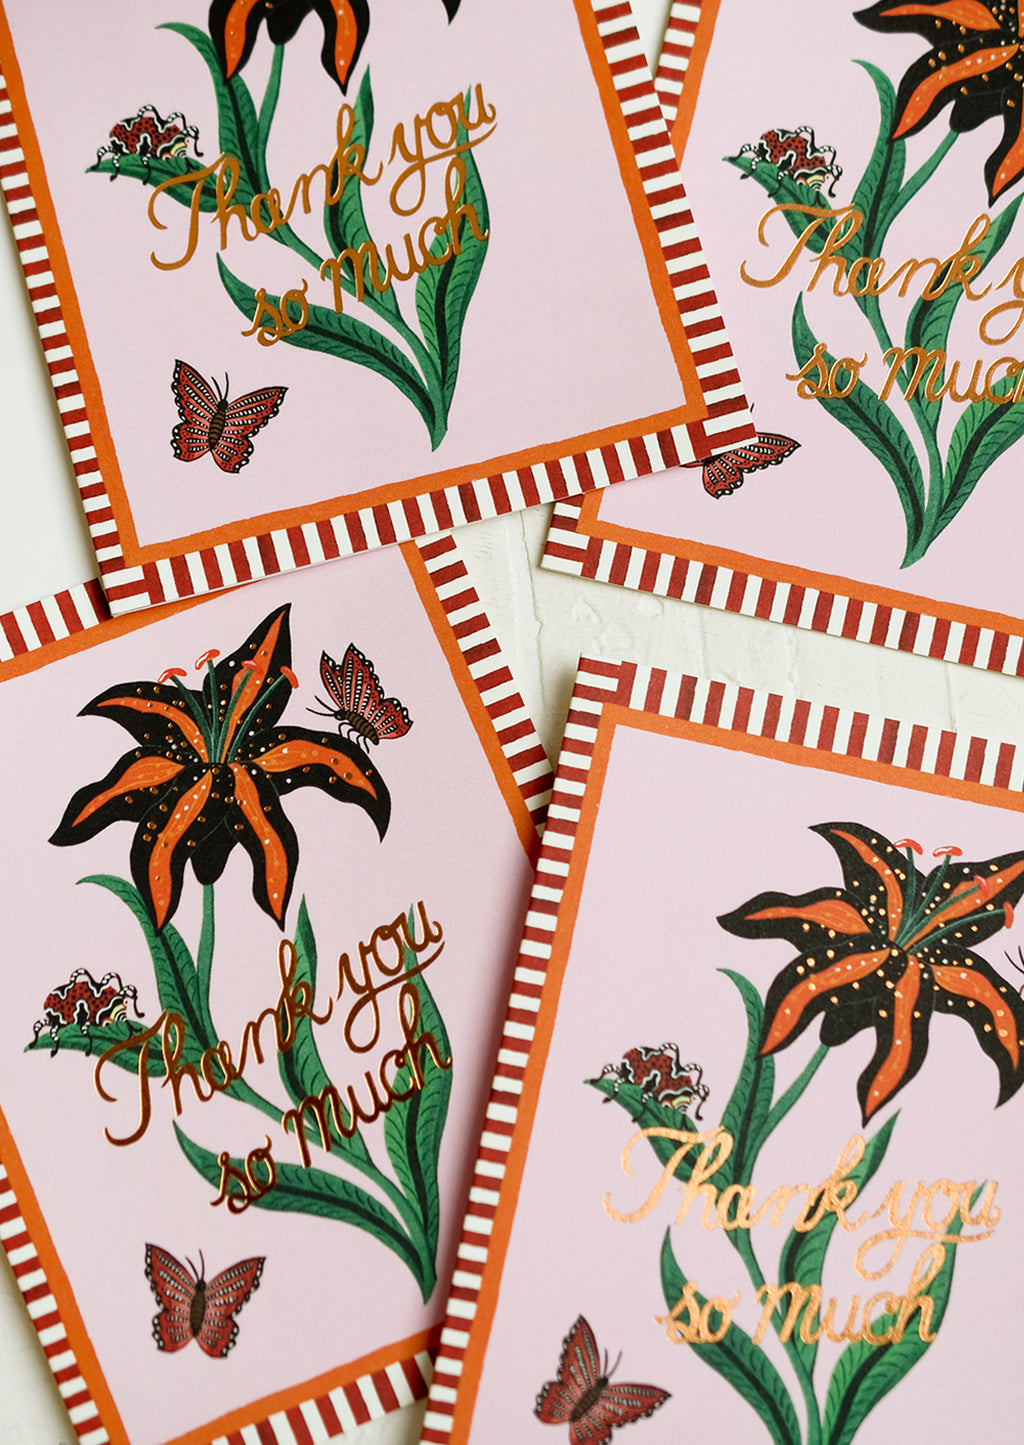 Boxed Set of 8: A tiger lily printed card set with striped border reading "Thank you so much".